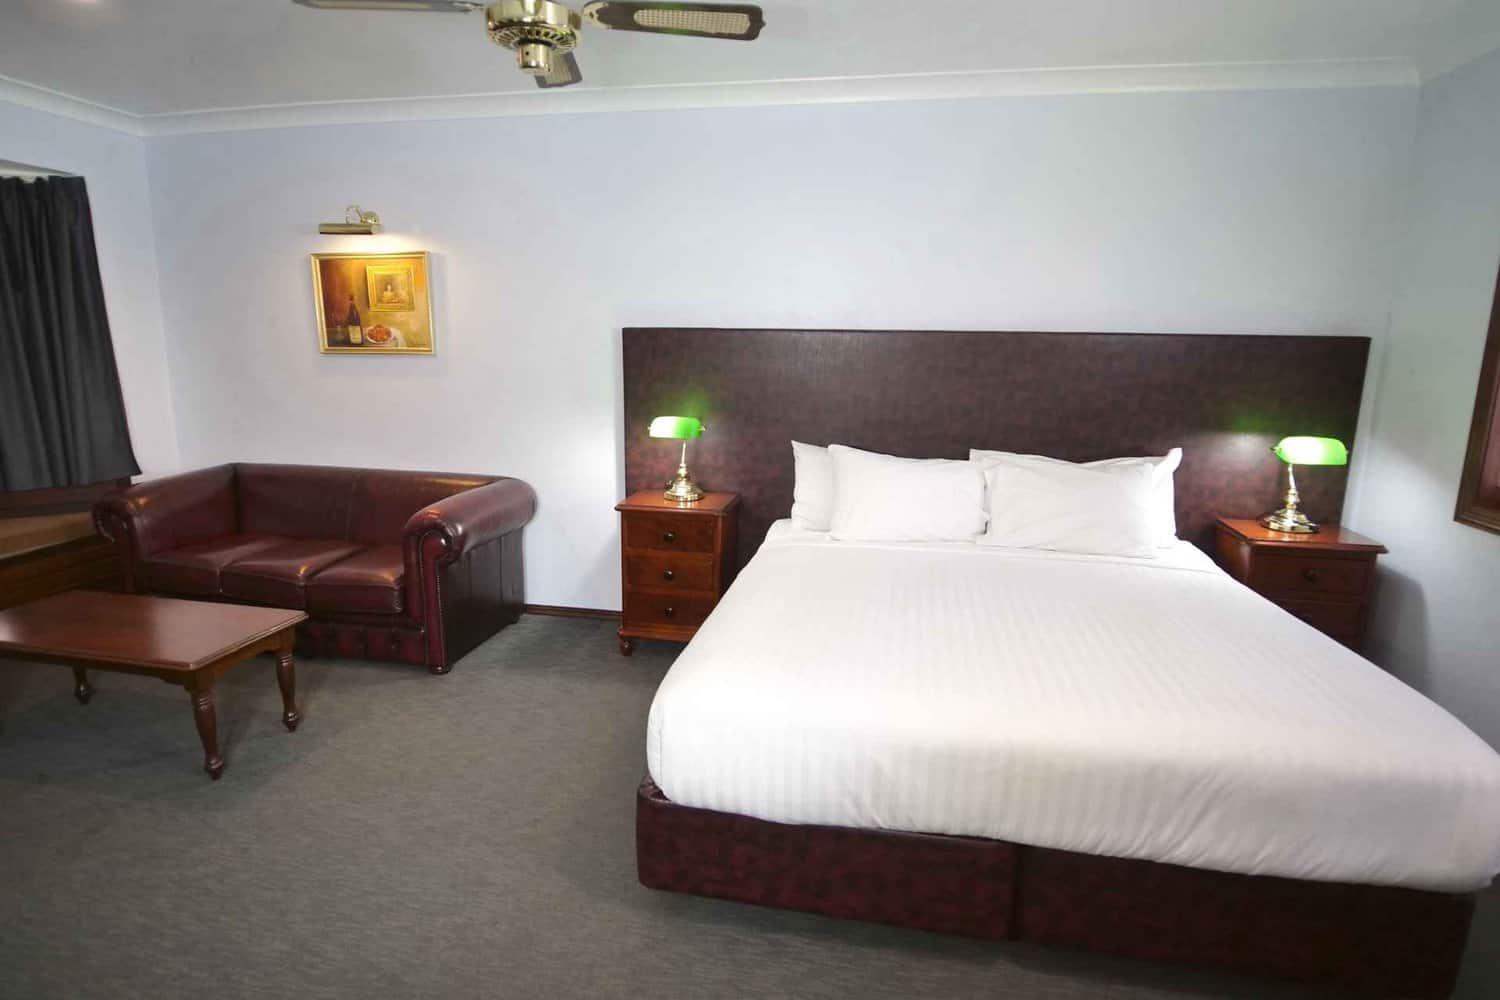 Image of king sized bed in hotel room, one of the different room types in a hotel